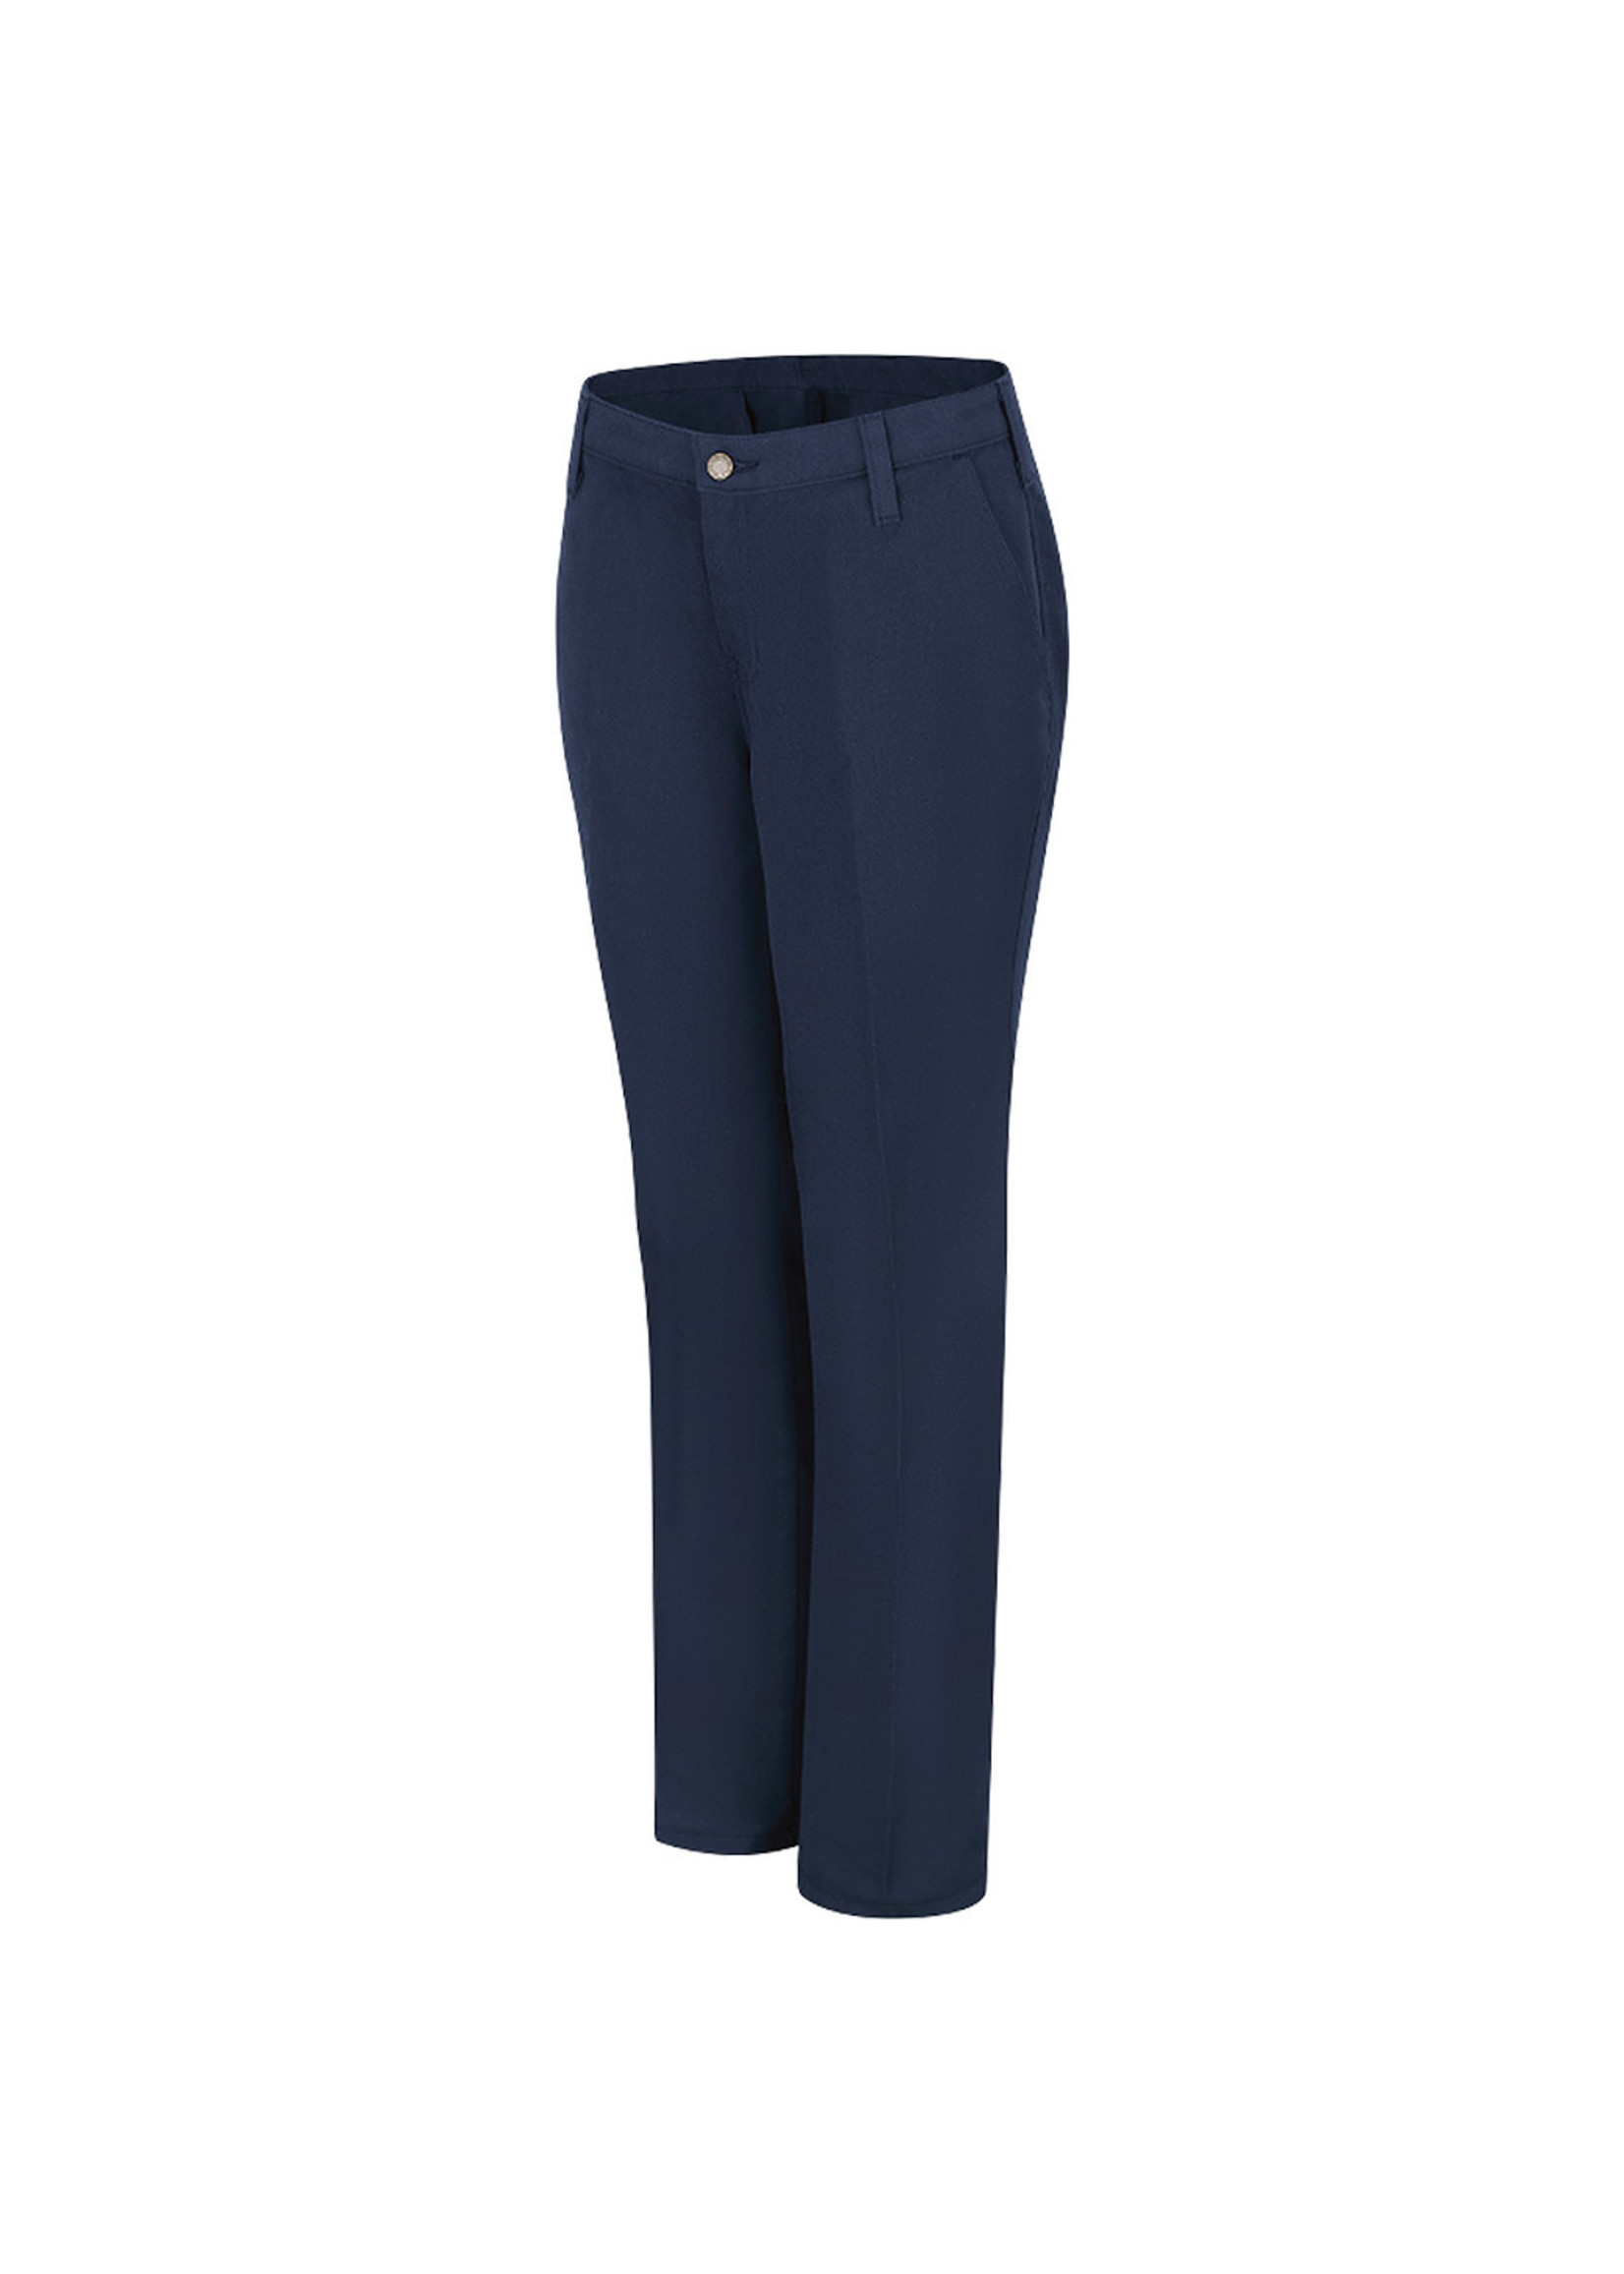 Womens Workrite Nomex Station Pant